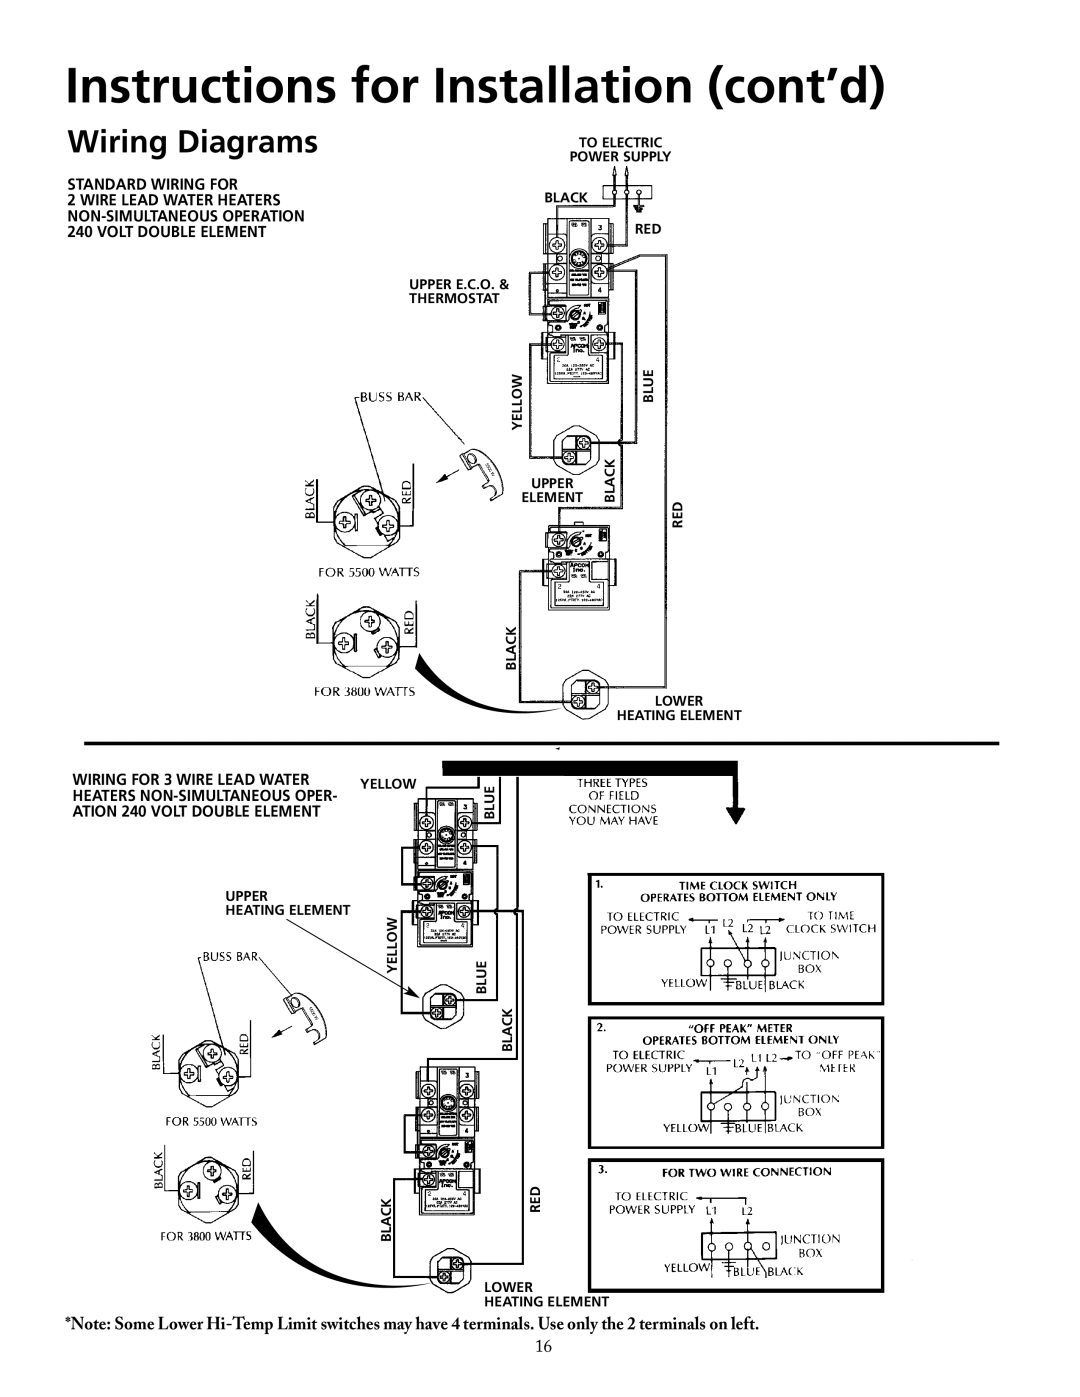 Maytag HRE2950T, HRE3966T, HRE3950T, HRE2940T Wiring Diagrams, Instructions for Installation cont’d, Standard Wiring For 